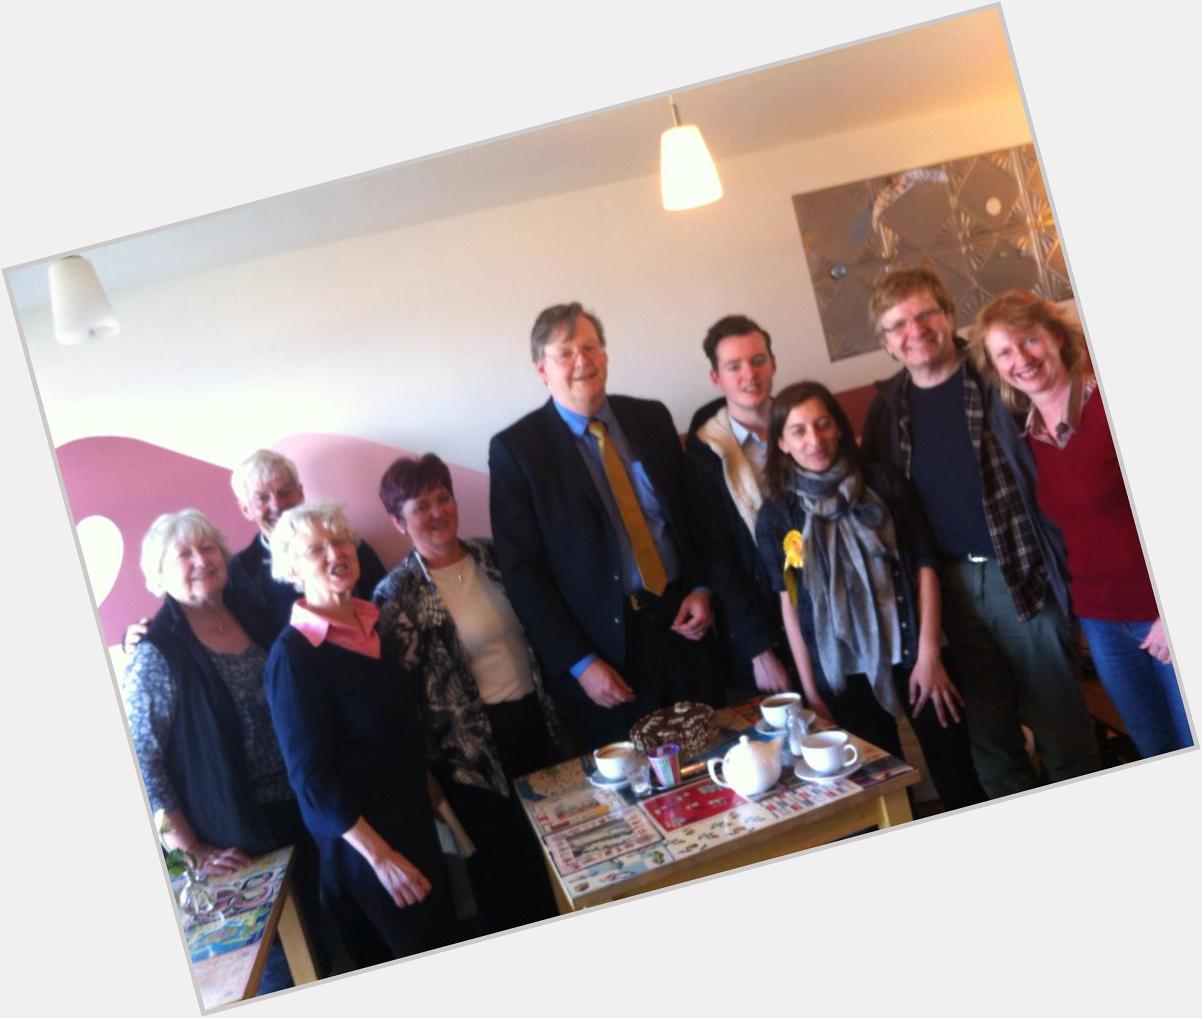 Happy birthday to Robert Smith who celebrated his birthday with supporters in Stonehaven  